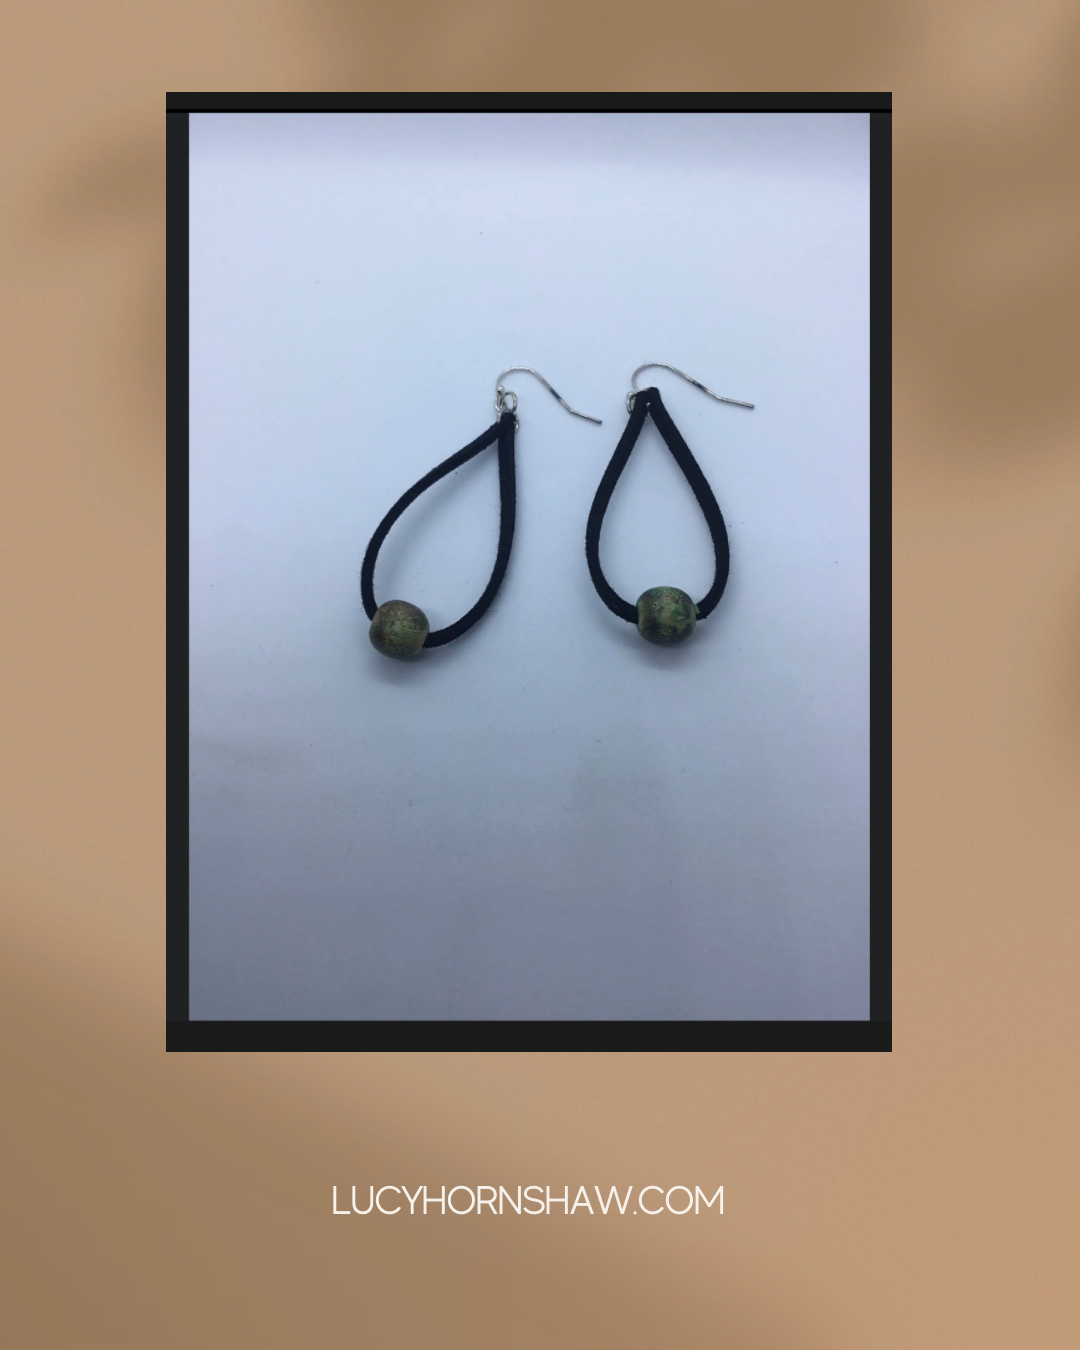 Black leather cord & gold bead earrings